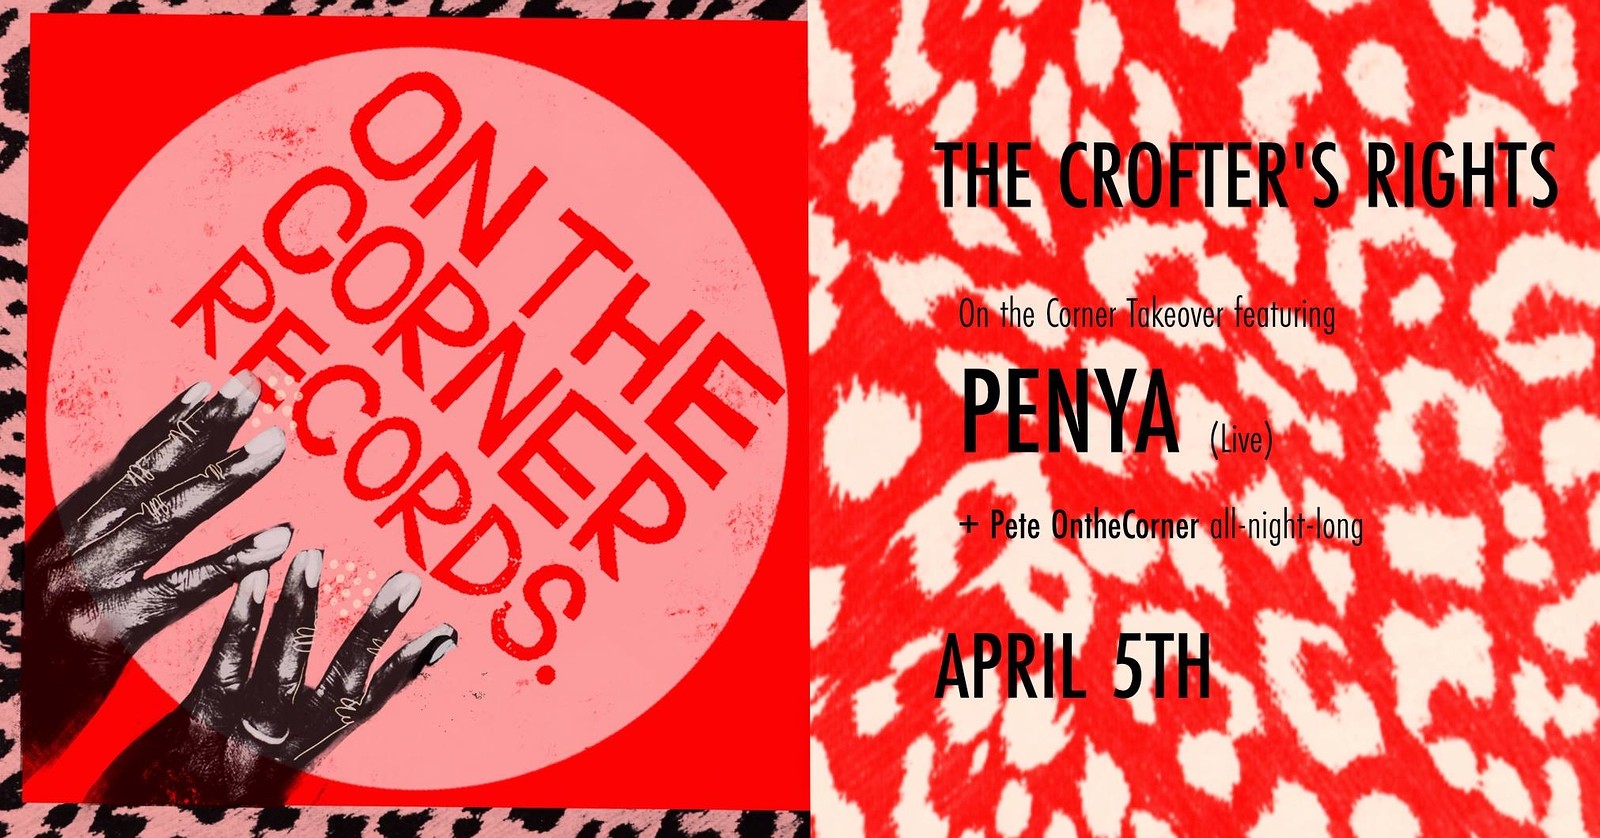 On The Corner Takeover: Penya  + Pete OTC at Crofters Rights